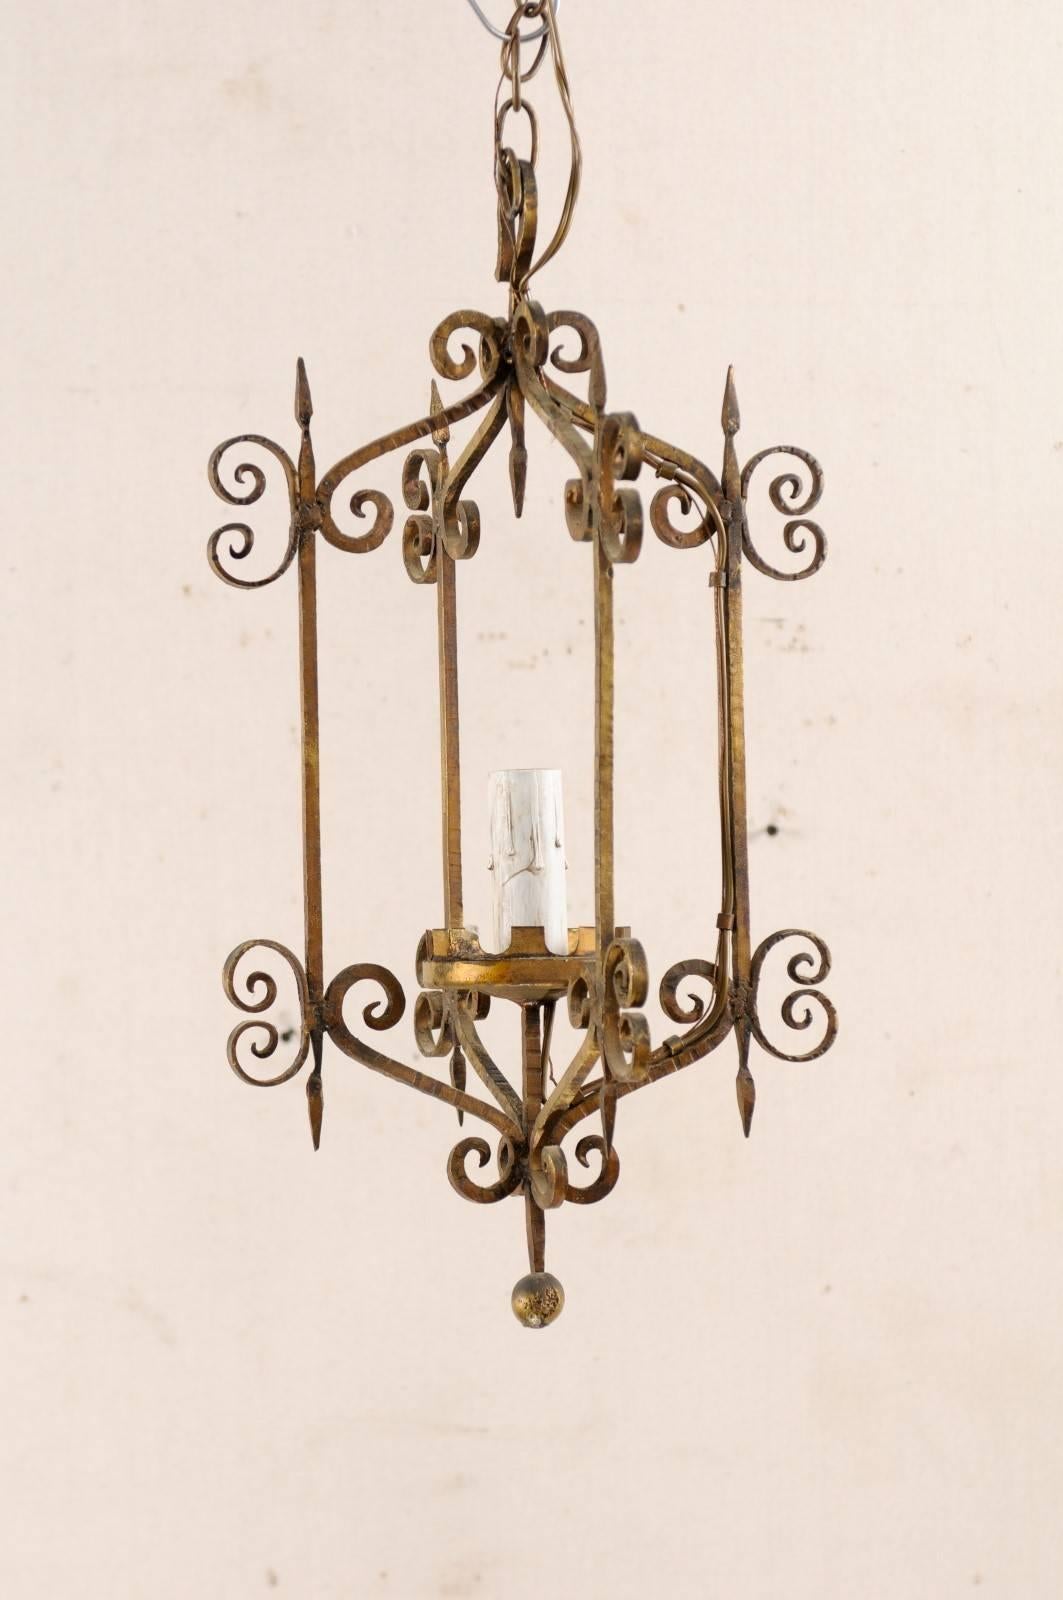 A French single light iron chandelier from the mid-20th century. This vintage French chandelier features a delightful iron-shaped body adorn in scrolled accents, and a small balled bottom finial. There is a nicely sized single light, with painted